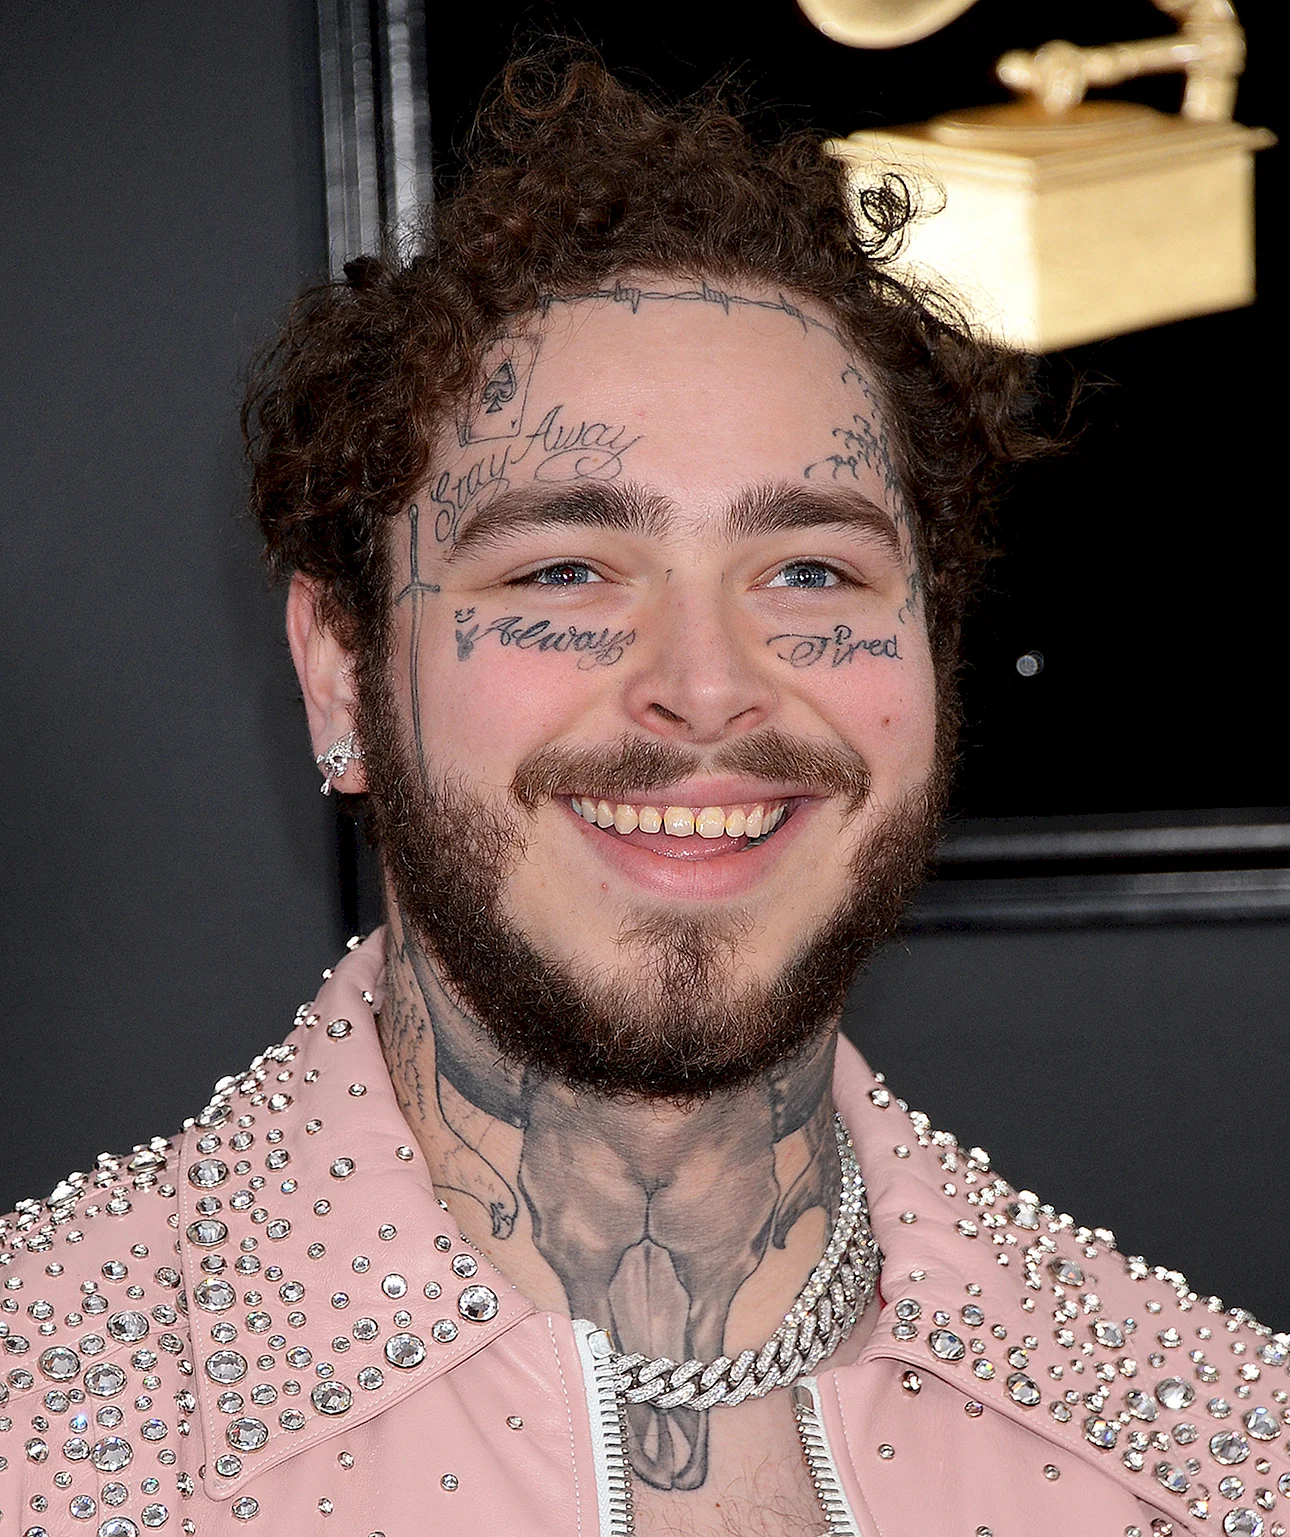 Post Malone 2022 Wallpaper For iPhone